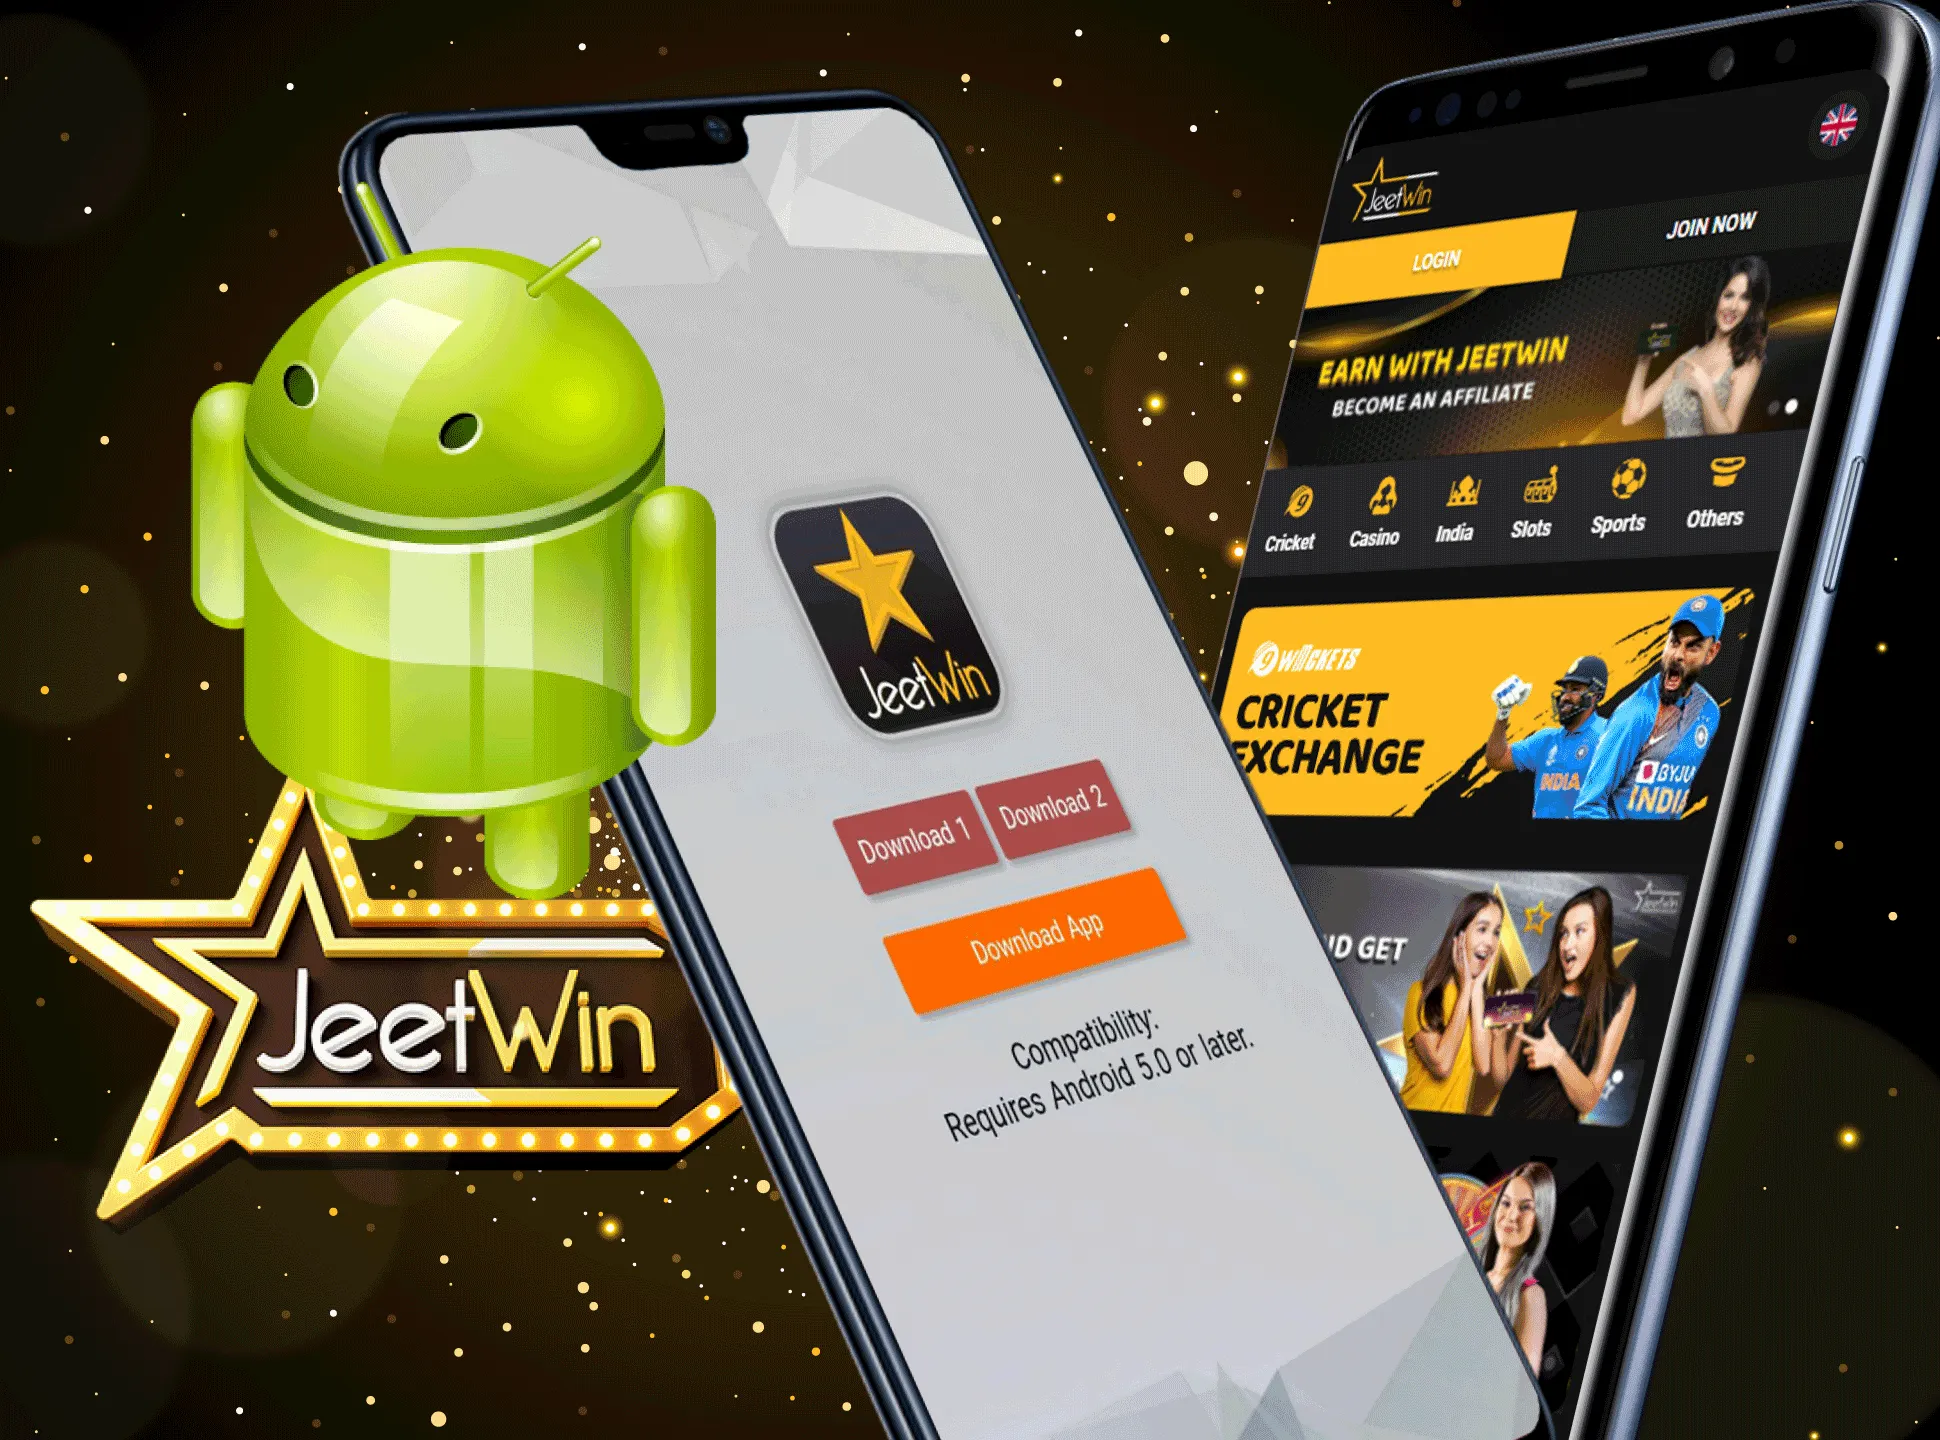 Download the Jeetwin Android app on your smartphone.